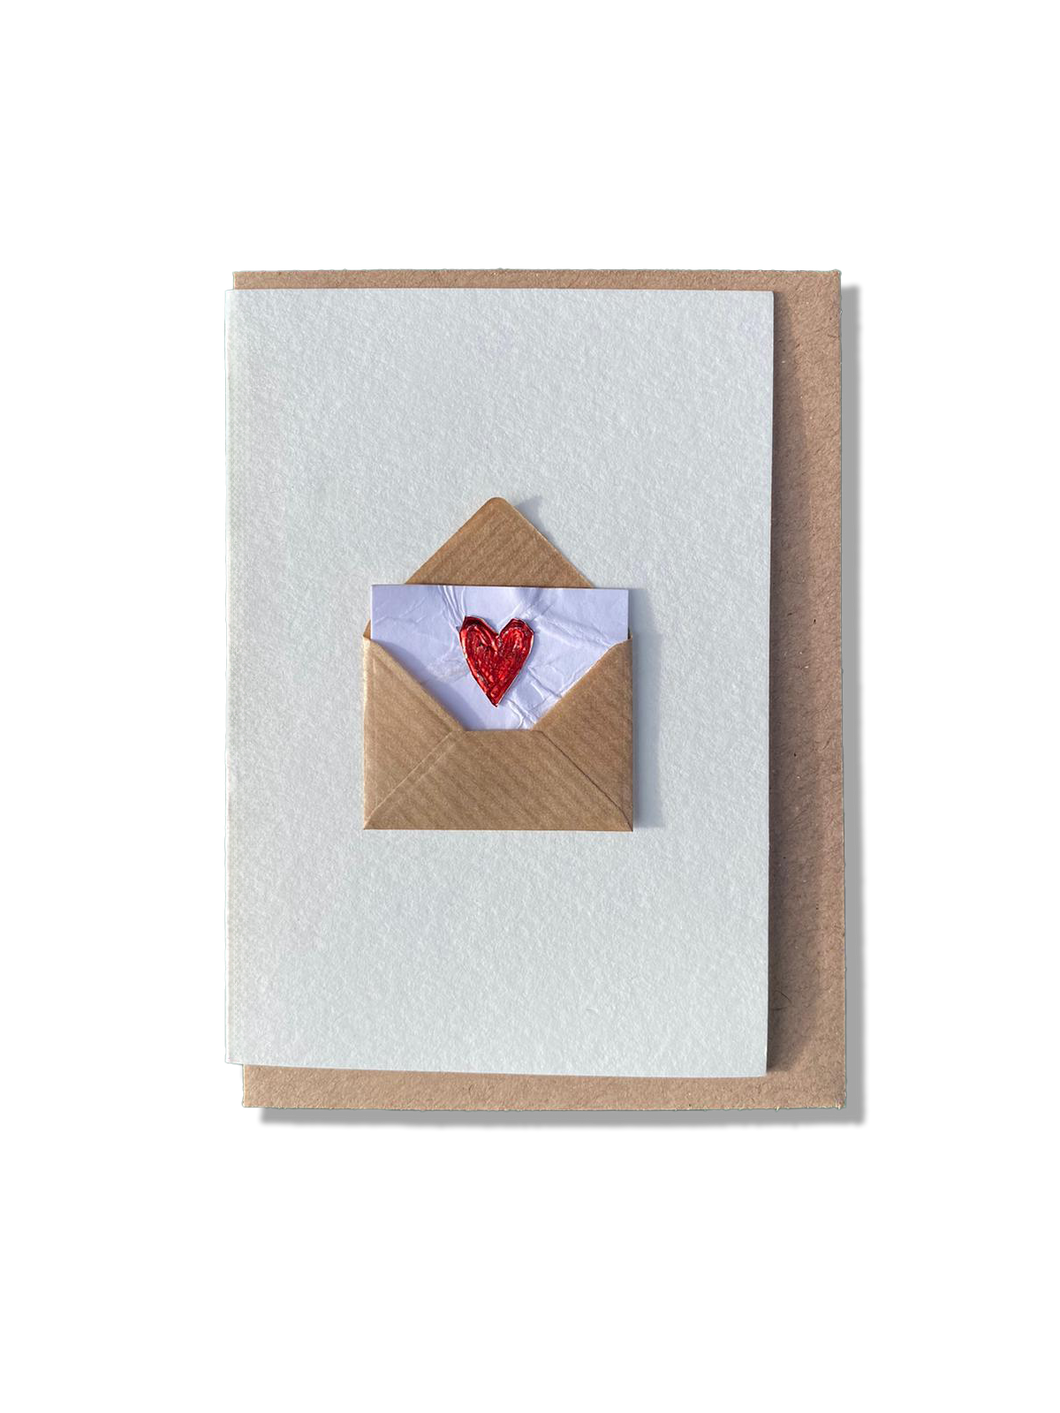 With Love - A7 Greetings Card with Tin Heart Detail